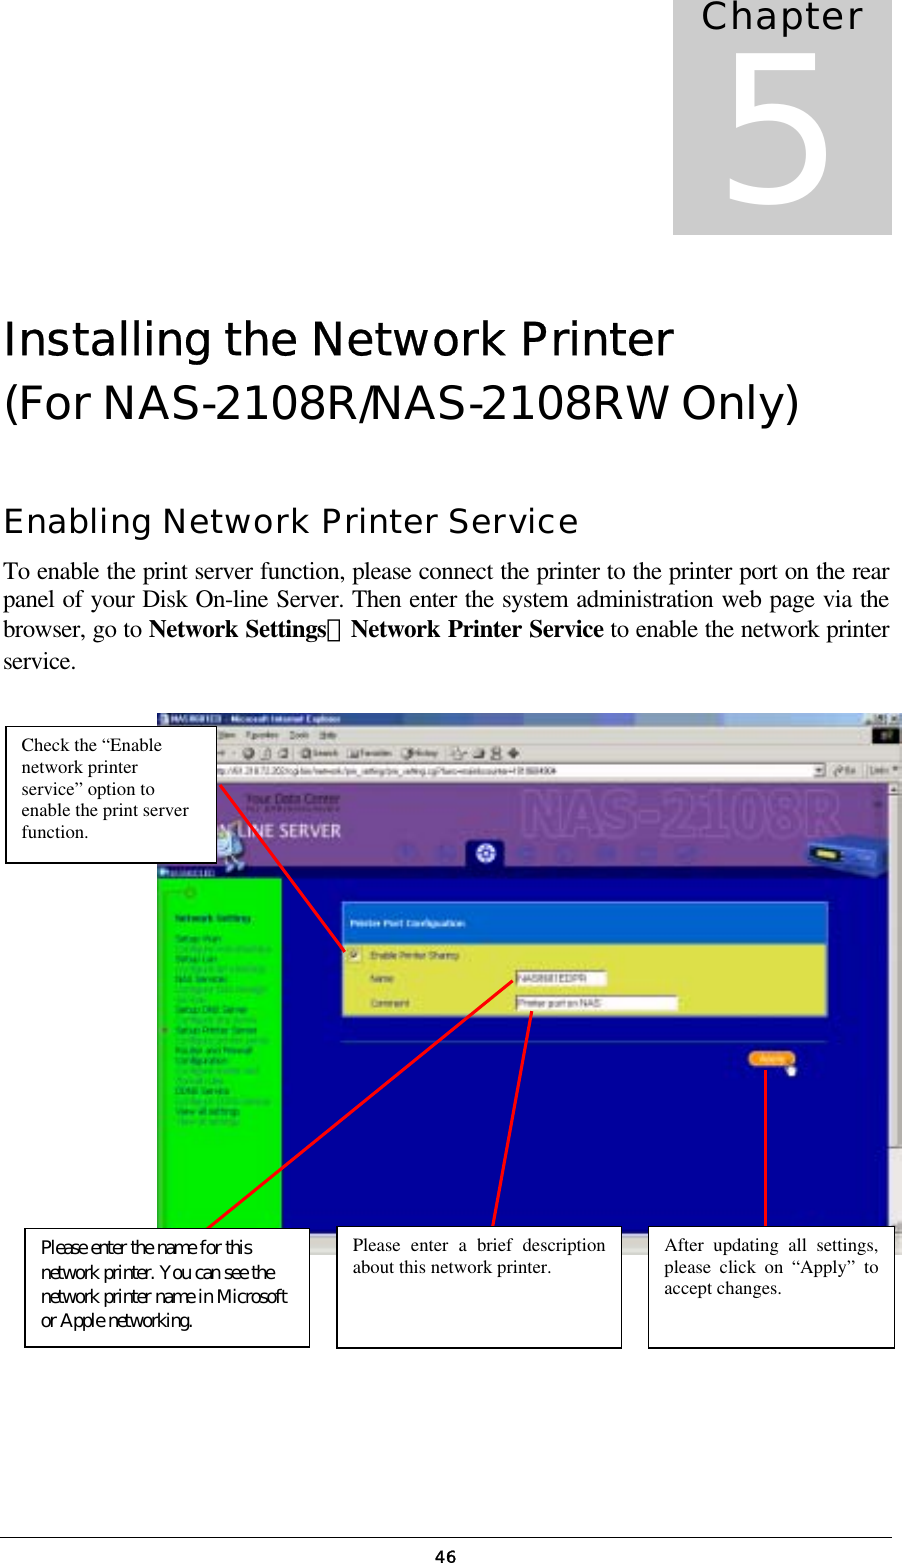   46Installing the Network Printer  (For NAS-2108R/NAS-2108RW Only) Enabling Network Printer Service To enable the print server function, please connect the printer to the printer port on the rear panel of your Disk On-line Server. Then enter the system administration web page via the browser, go to Network Settings．Network Printer Service to enable the network printer service.               Chapter 5Check the “Enable network printer service” option to enable the print server function.  Please enter a brief description about this network printer.  After updating all settings,please click on “Apply” toaccept changes. Please enter the name for this network printer. You can see the network printer name in Microsoft or Apple networking.  